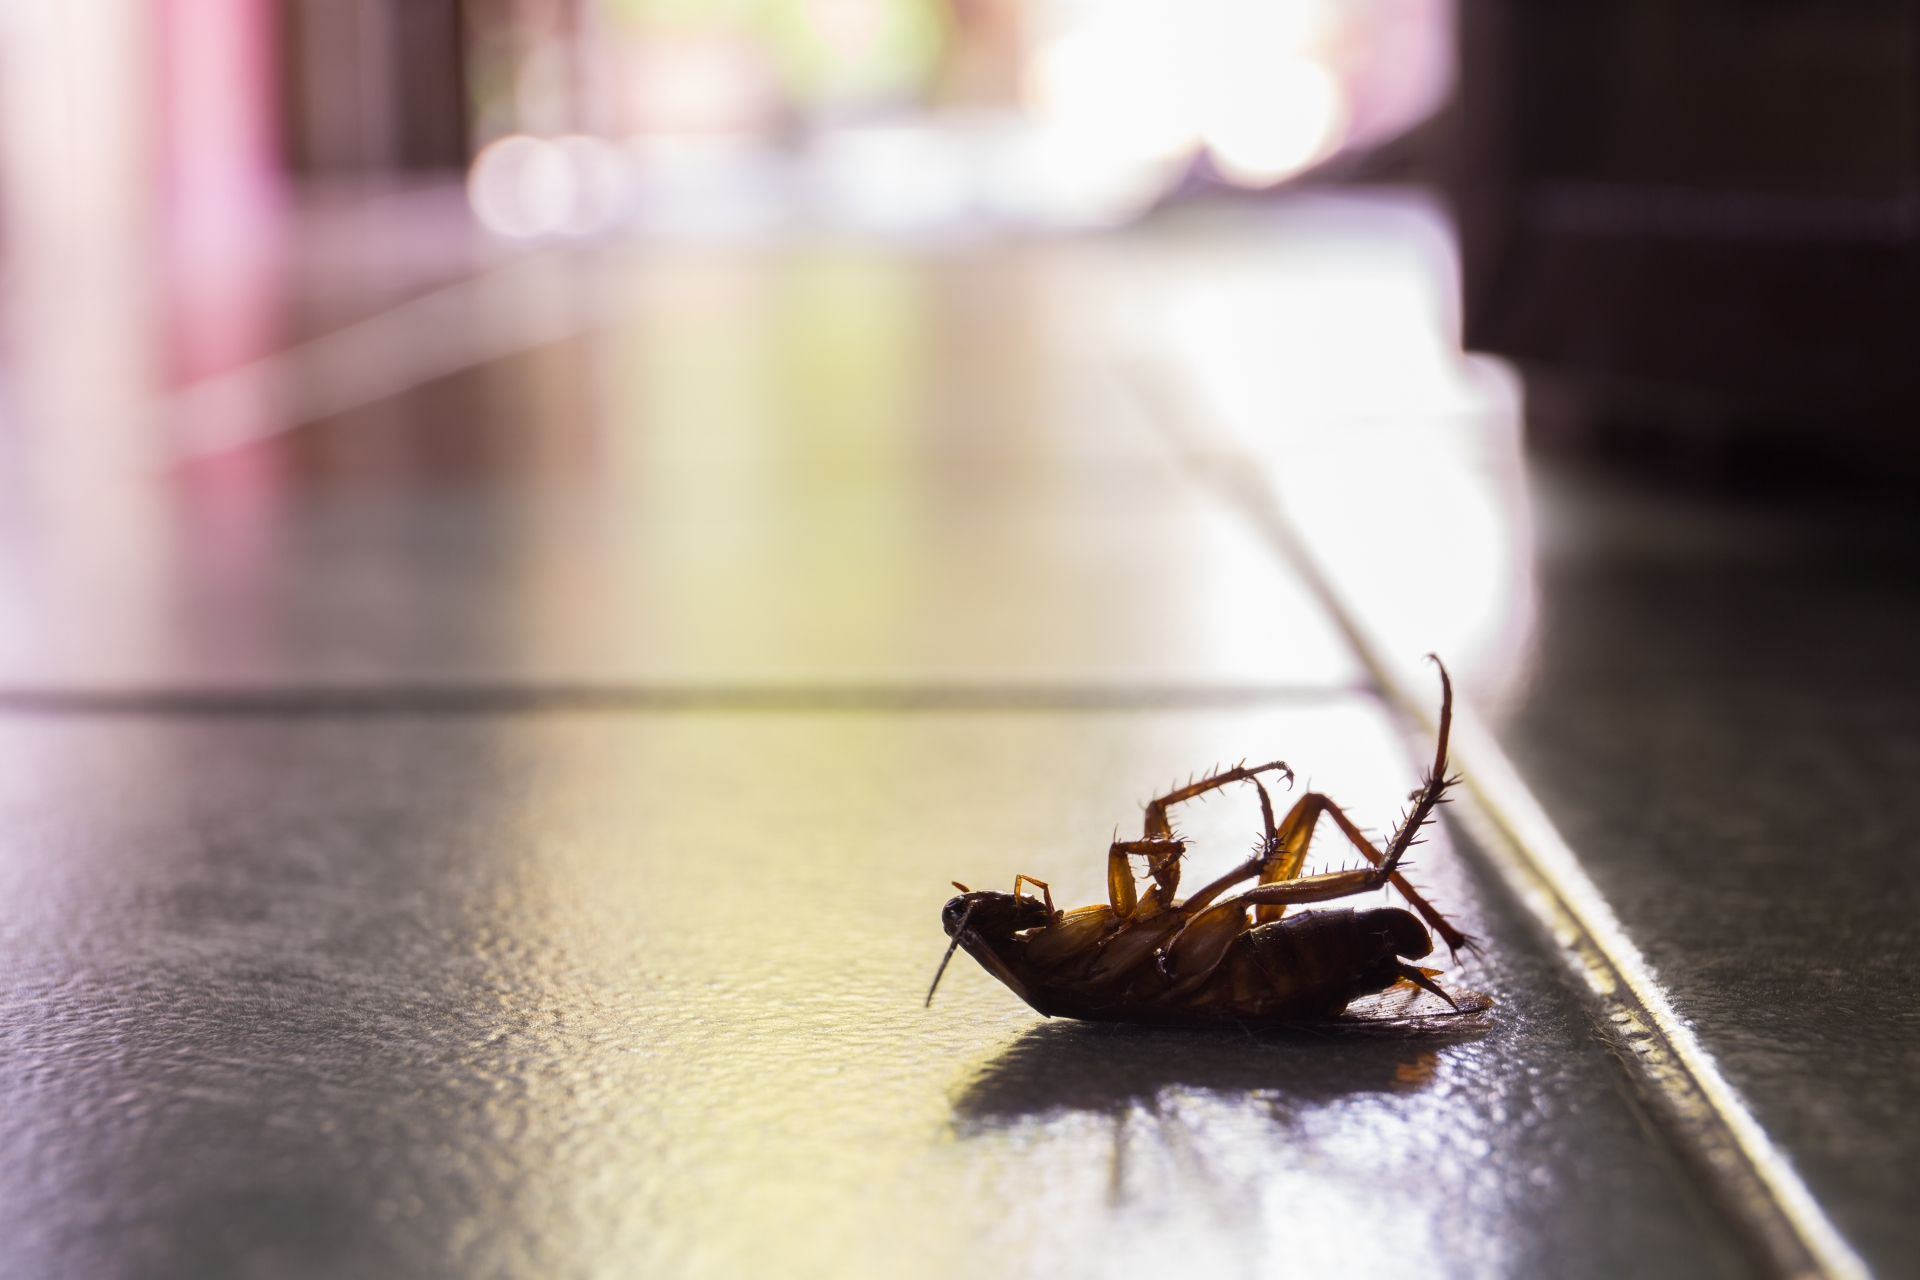 Cockroach Control, Pest Control in Rickmansworth, Chorleywood, Croxley Green, WD3. Call Now 020 8166 9746